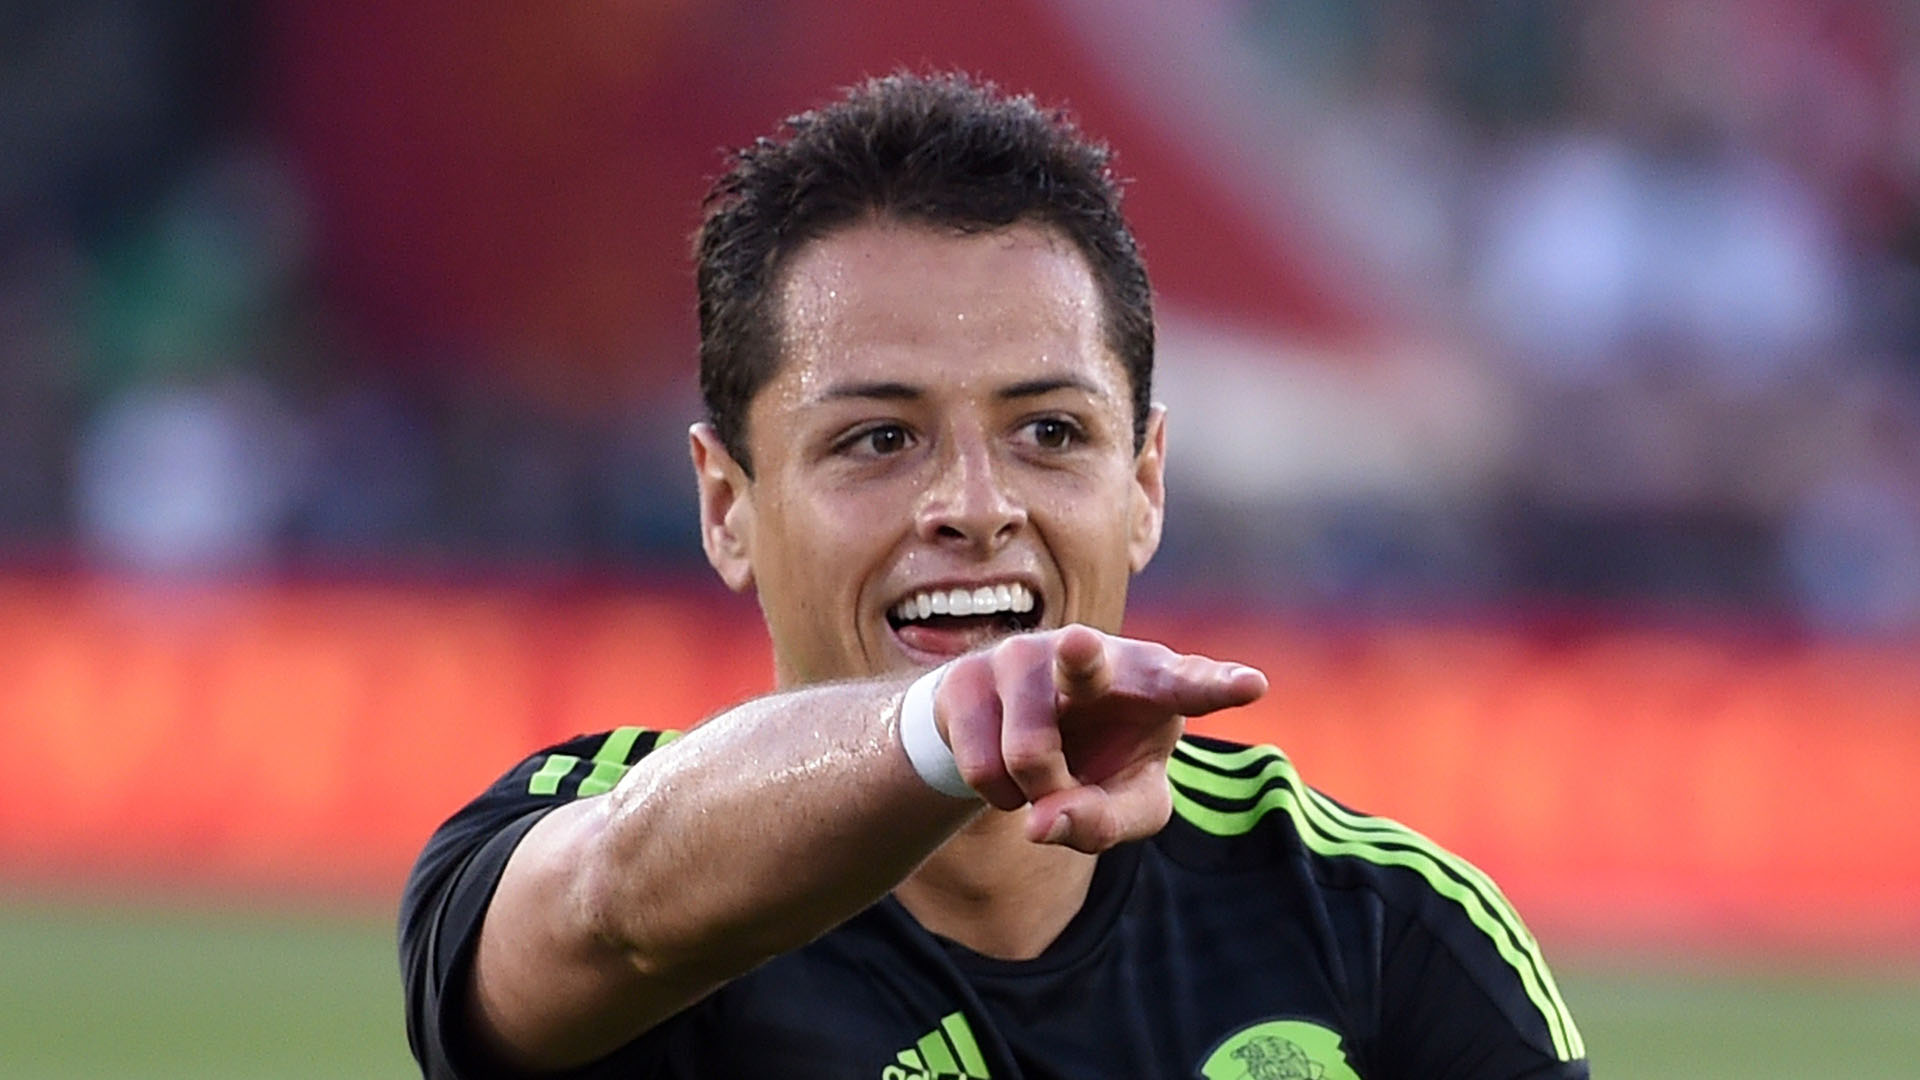 Download Free Modern Chicharito The Wallpapers 1920x1080px , HD Wallpaper & Backgrounds